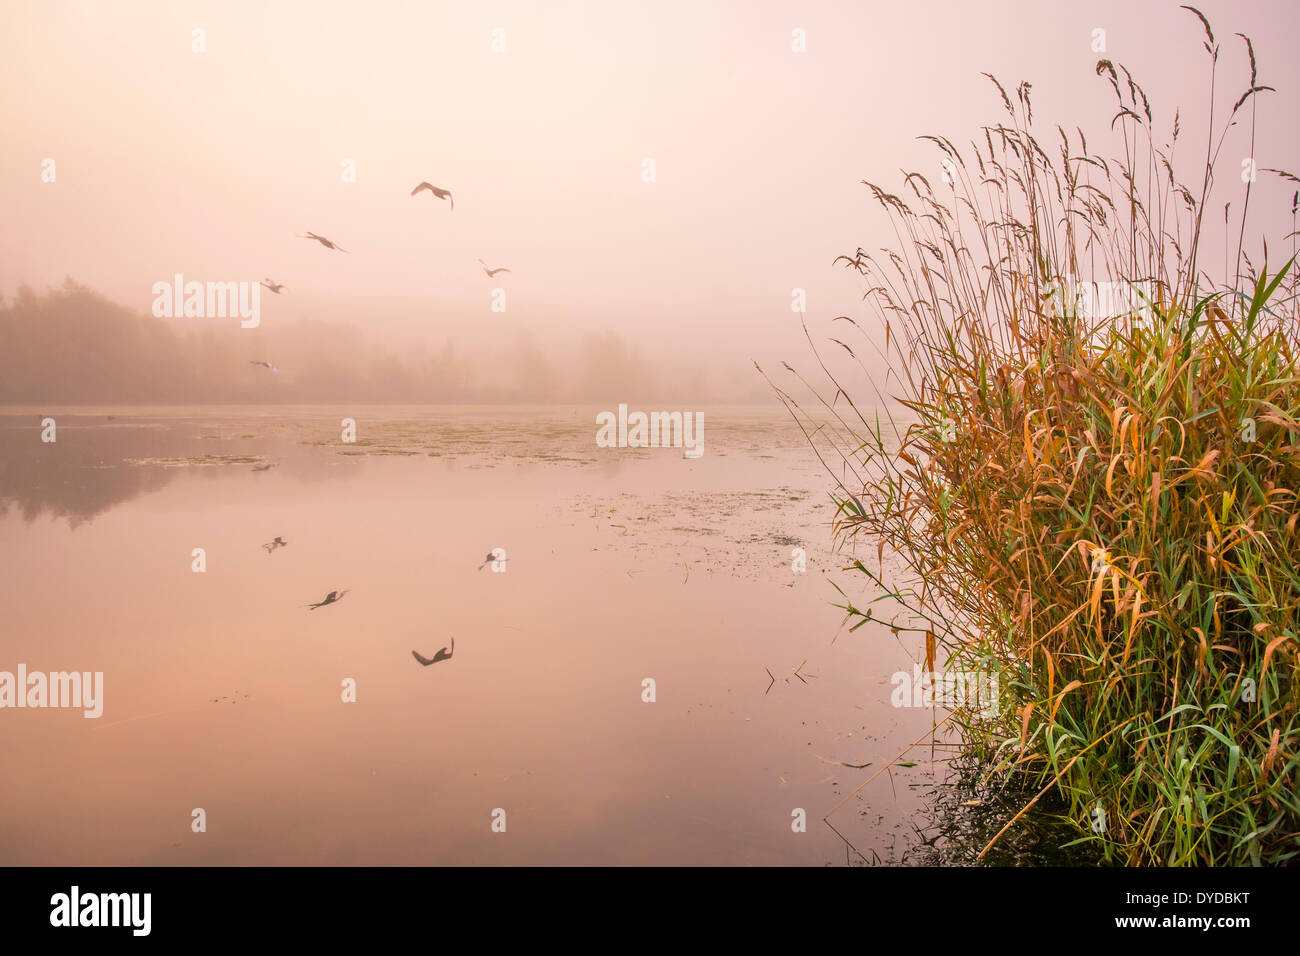 Swans take off from a lake on a misty morning. Stock Photo